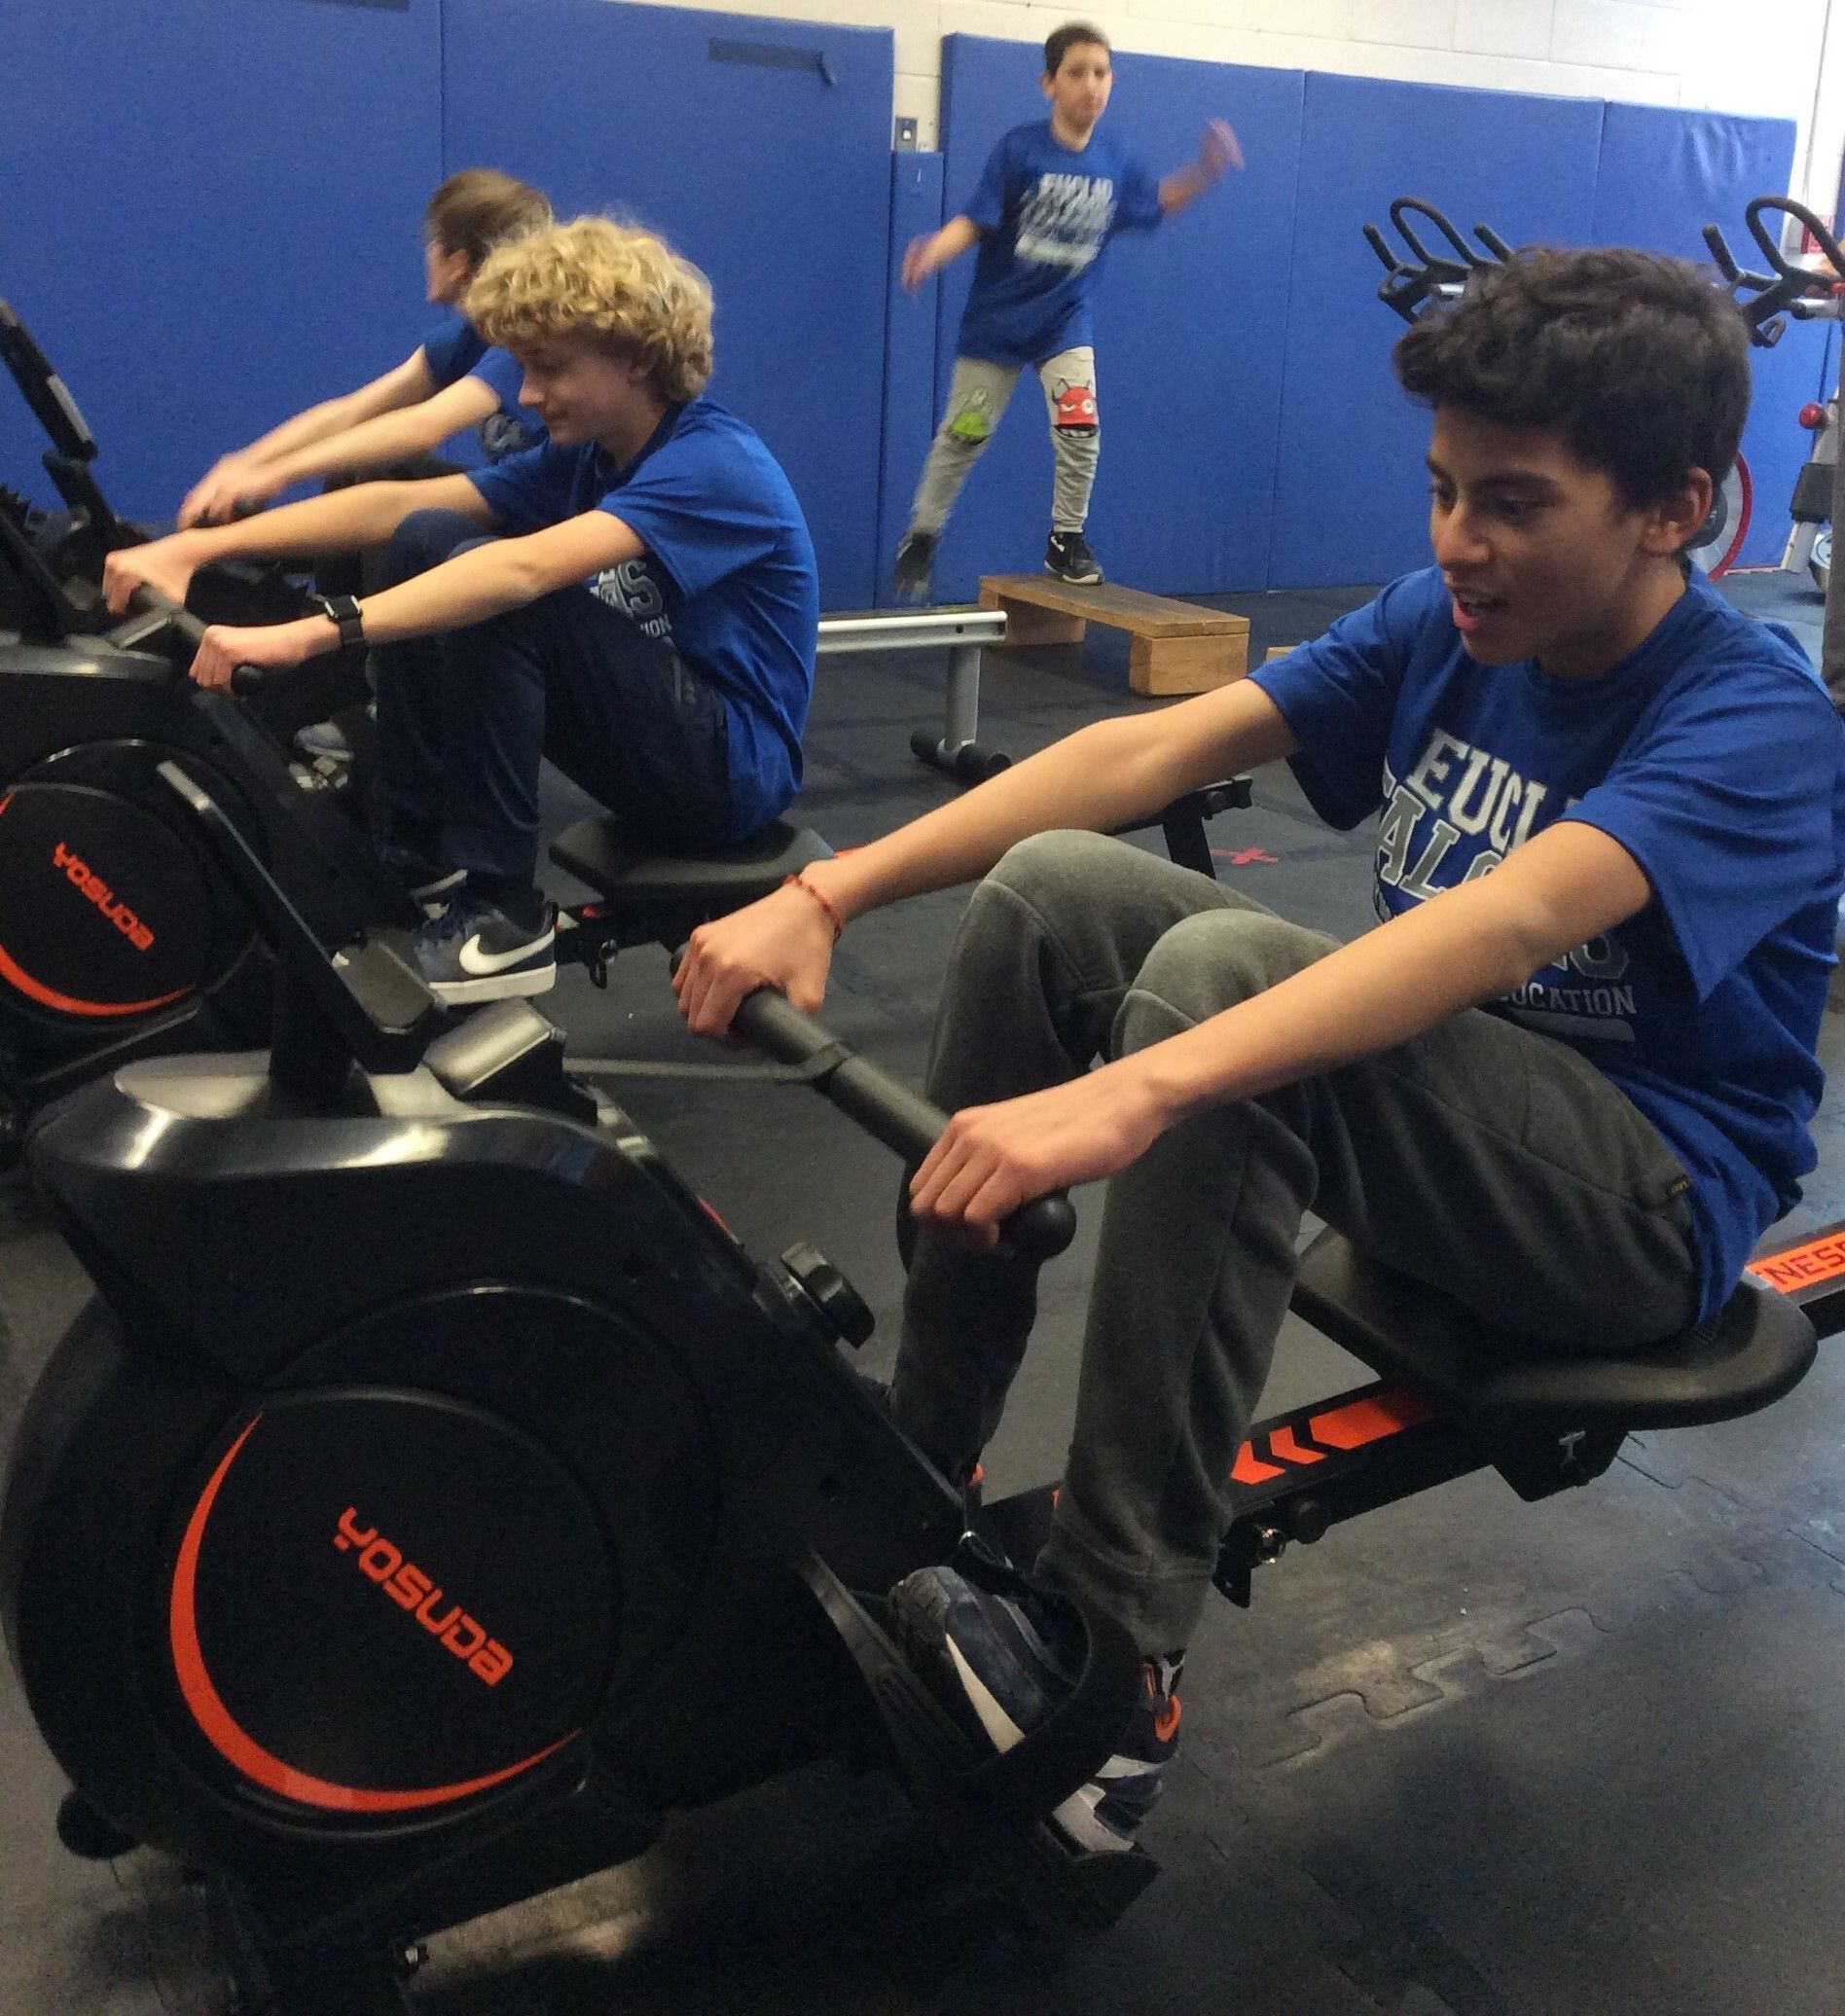 Two middle school students working out on a rowing machine. One has blonde hair. One has dark hair.